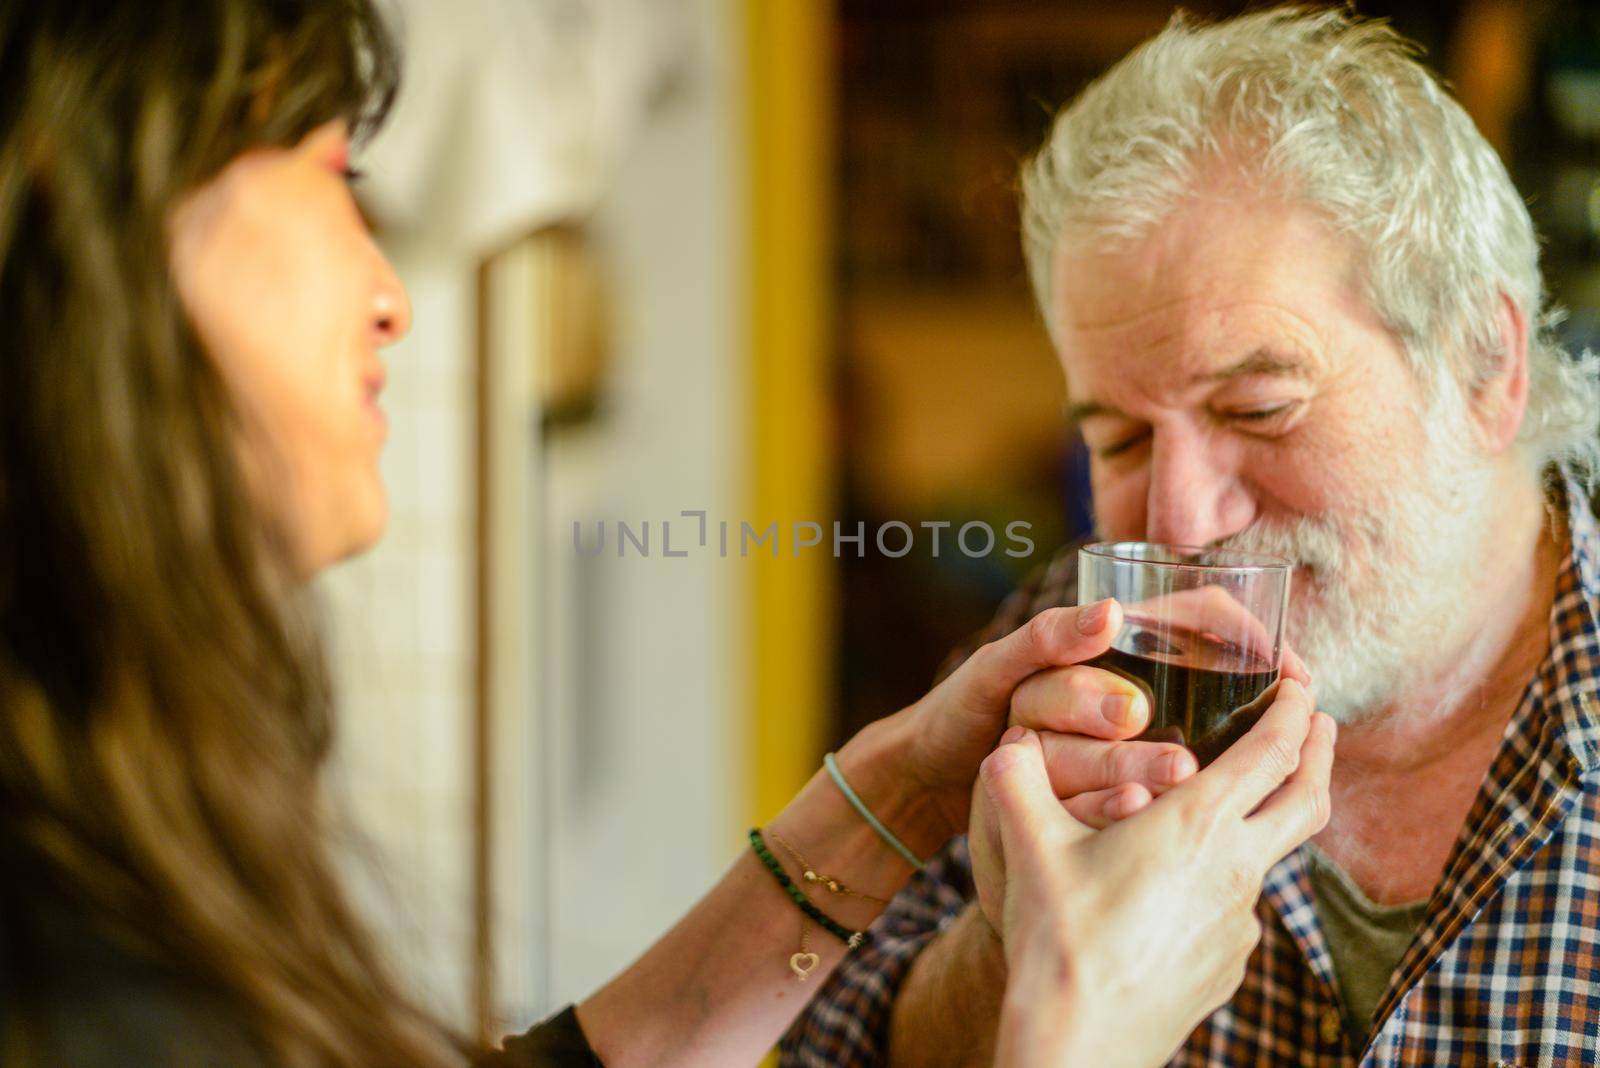 caucasian man drinking wine and getting drunk harassing young hispanic woman wife - alcoholism and domestic violence concept by verbano